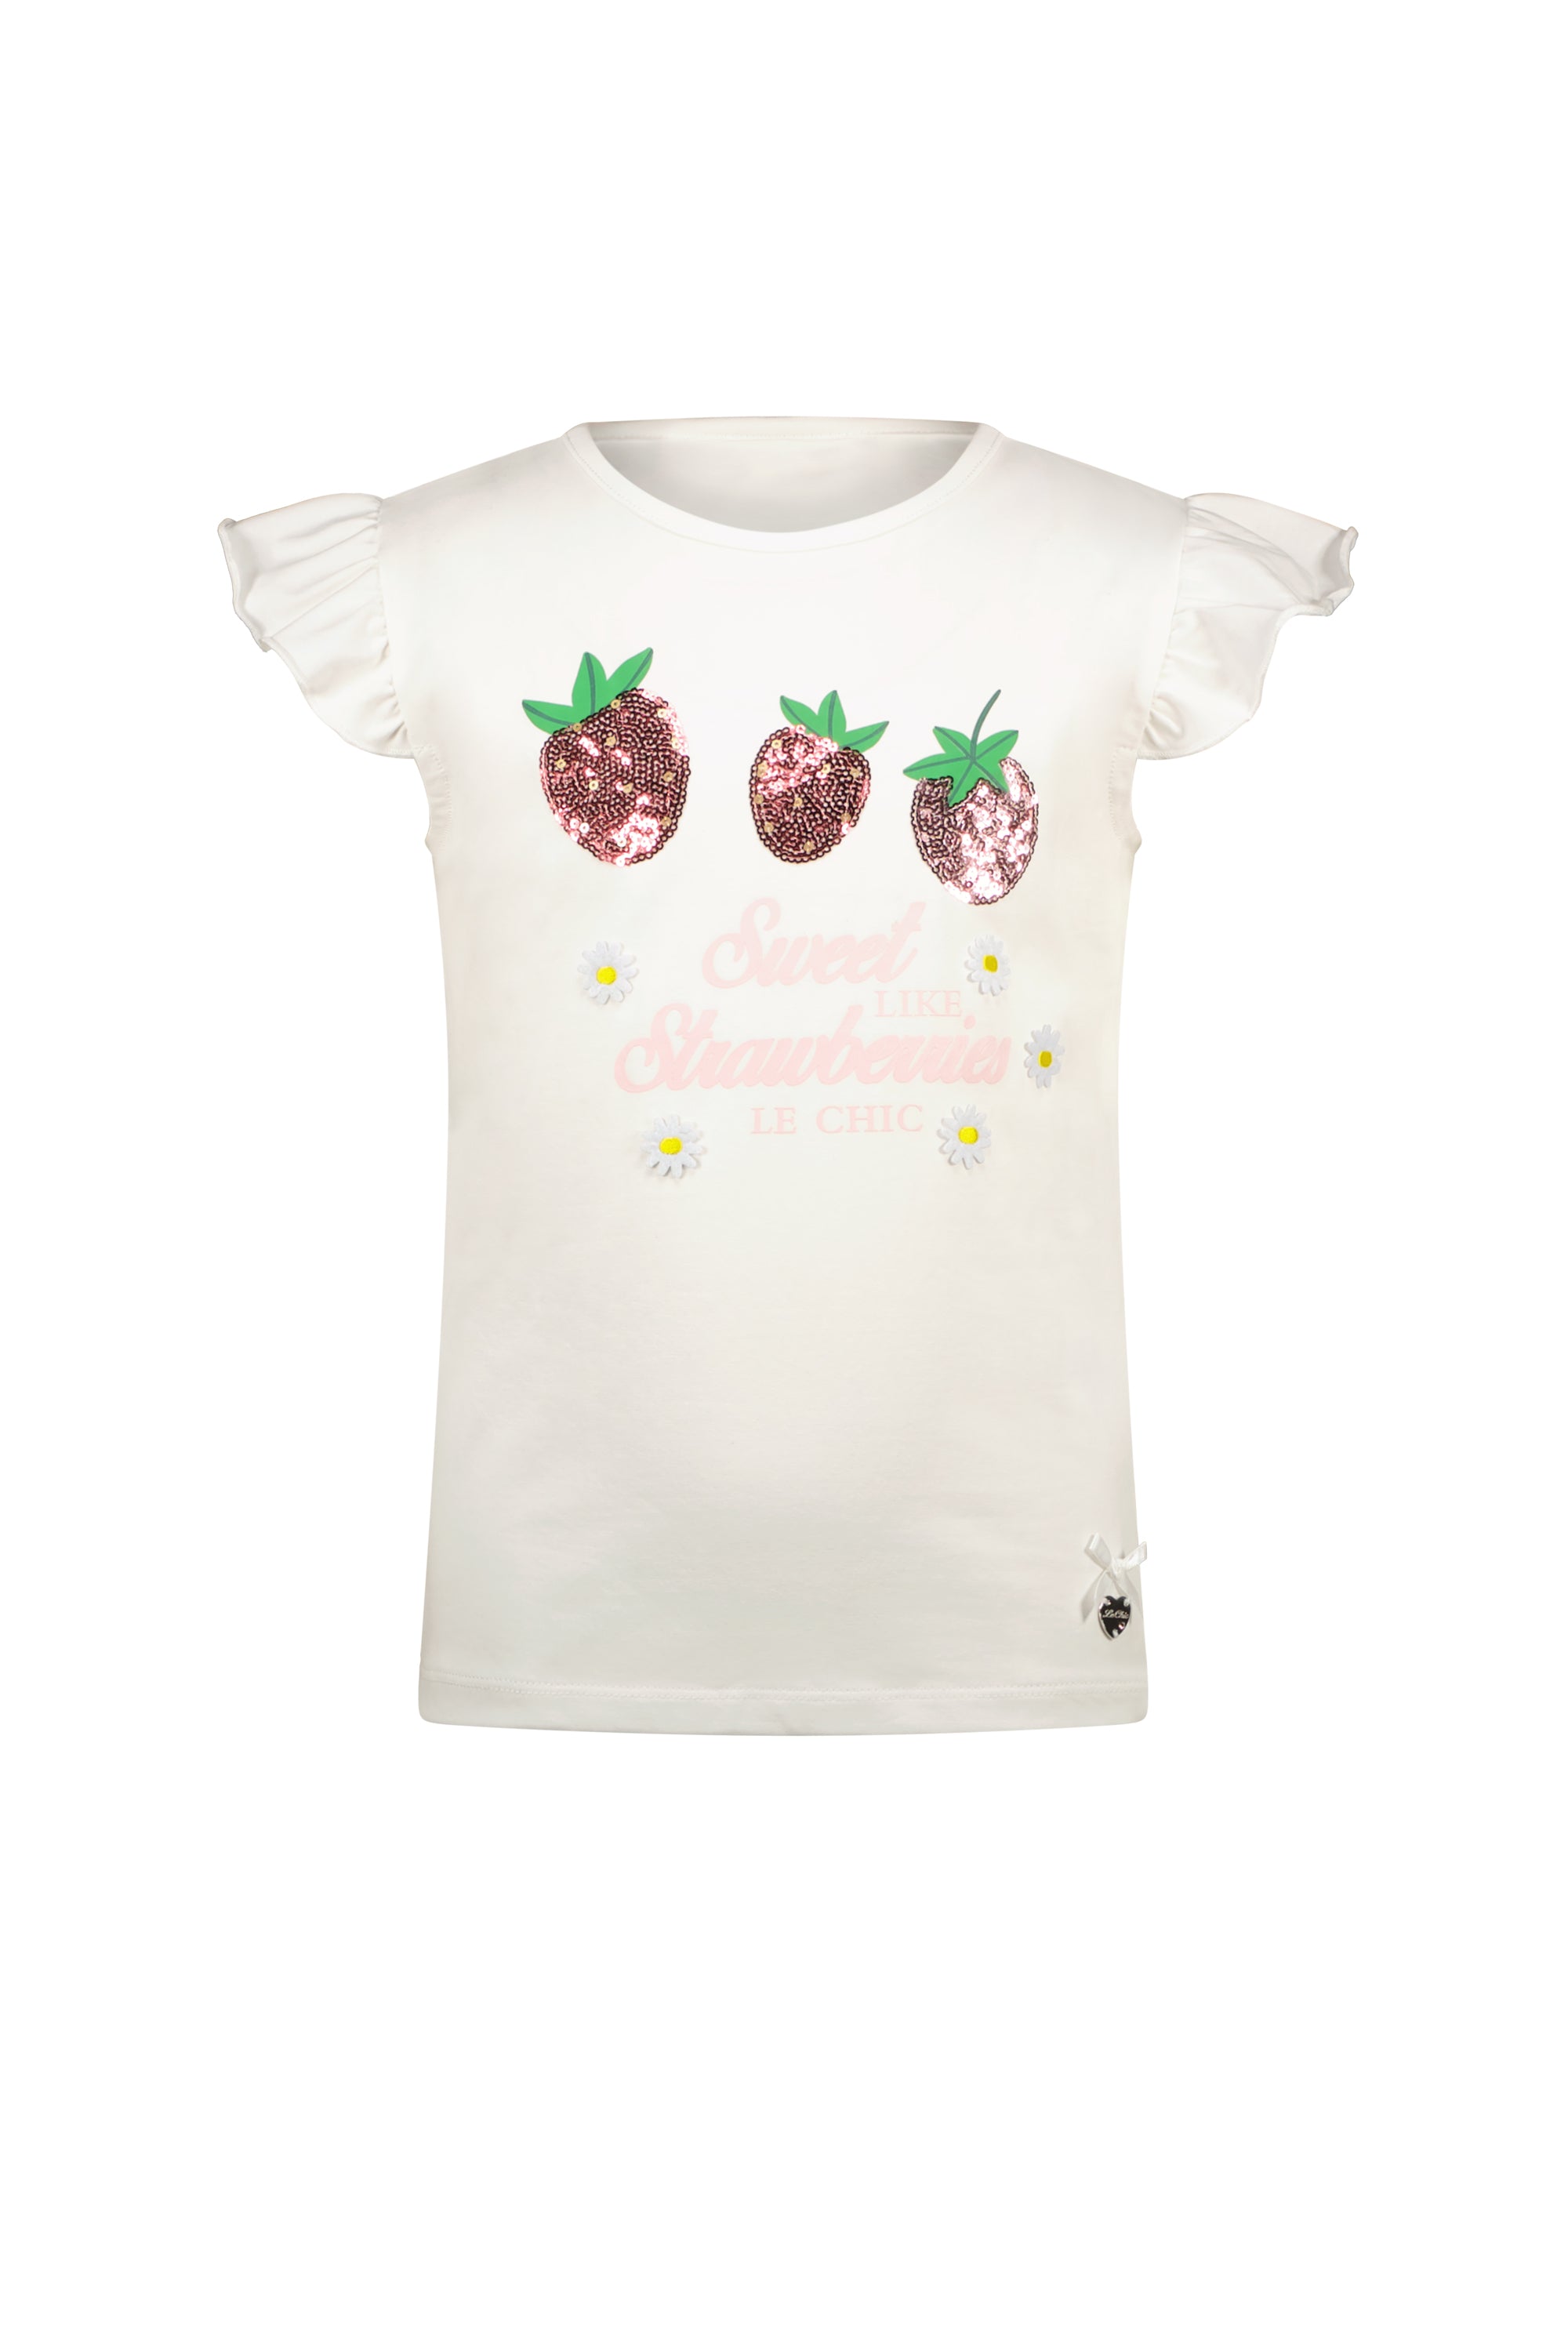 NOSLY strawberries T-shirt